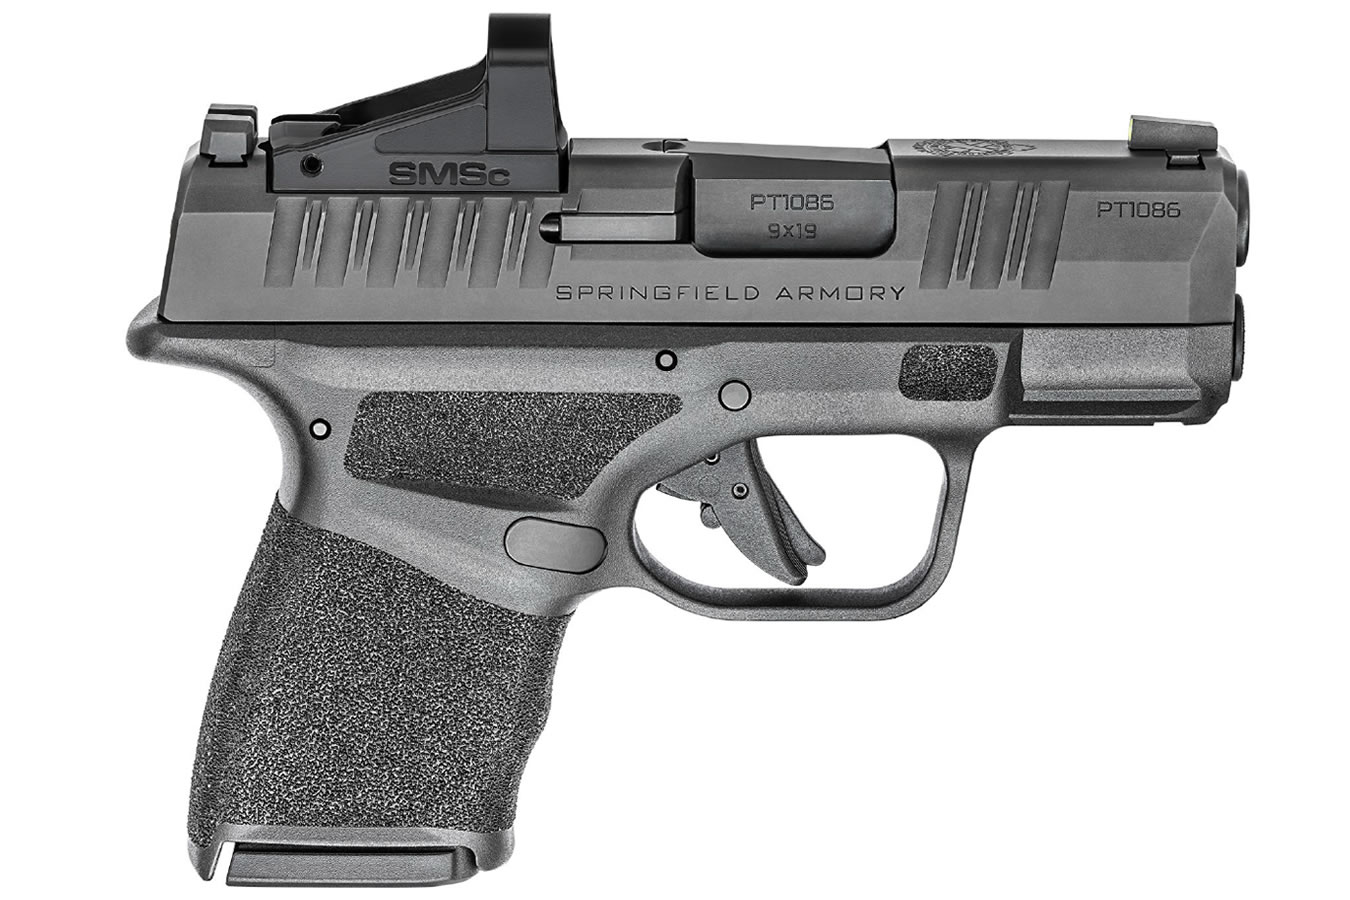 HELLCAT MICRO-COMPACT 9MM PISTOL WITH SHIELD SMSC RED DOT (LE)